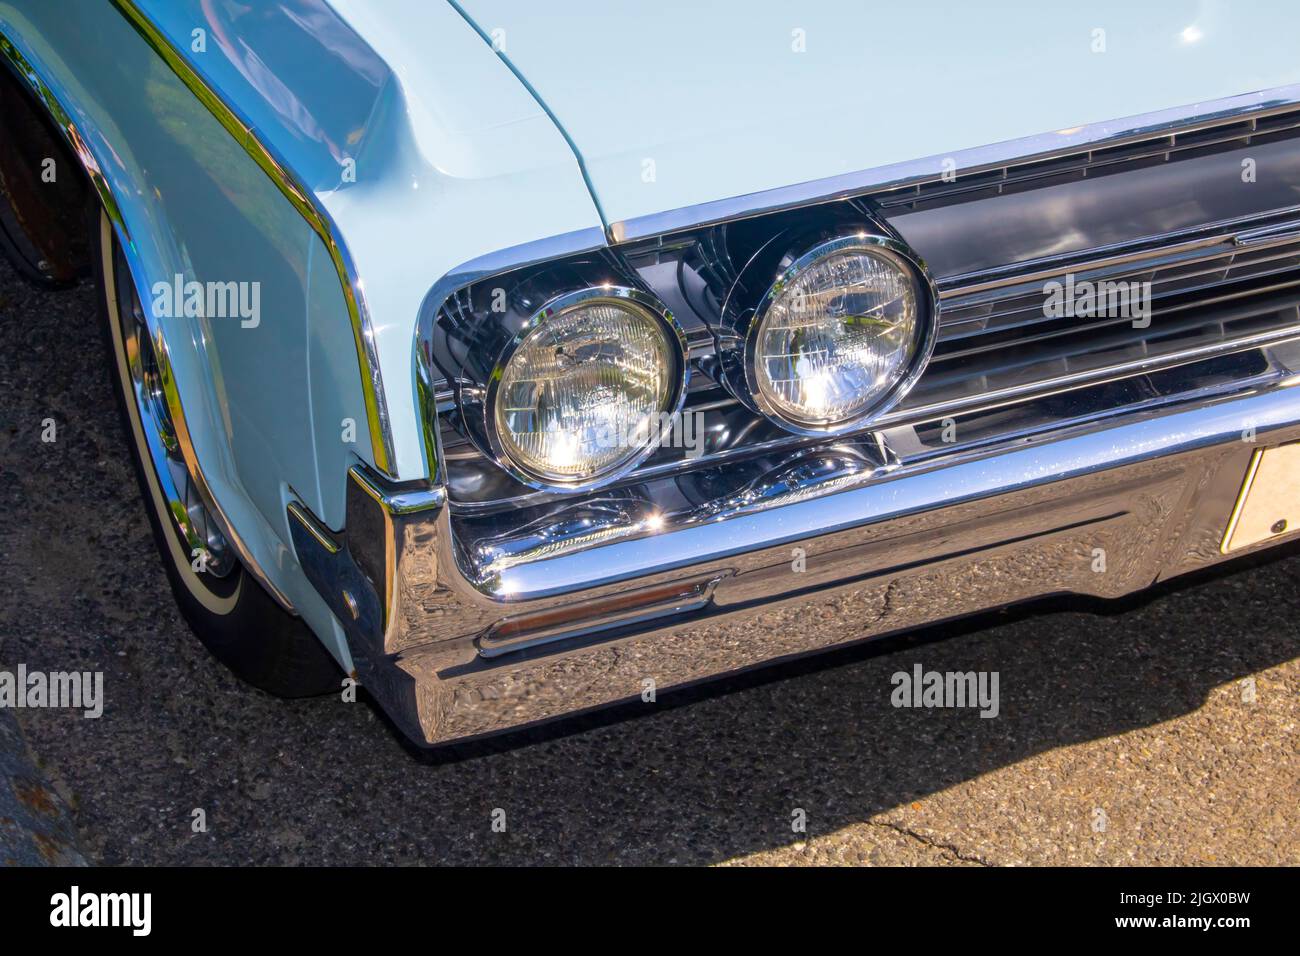 close up of classic vintage aesthetic car front lights, grille, chrome bumper Stock Photo